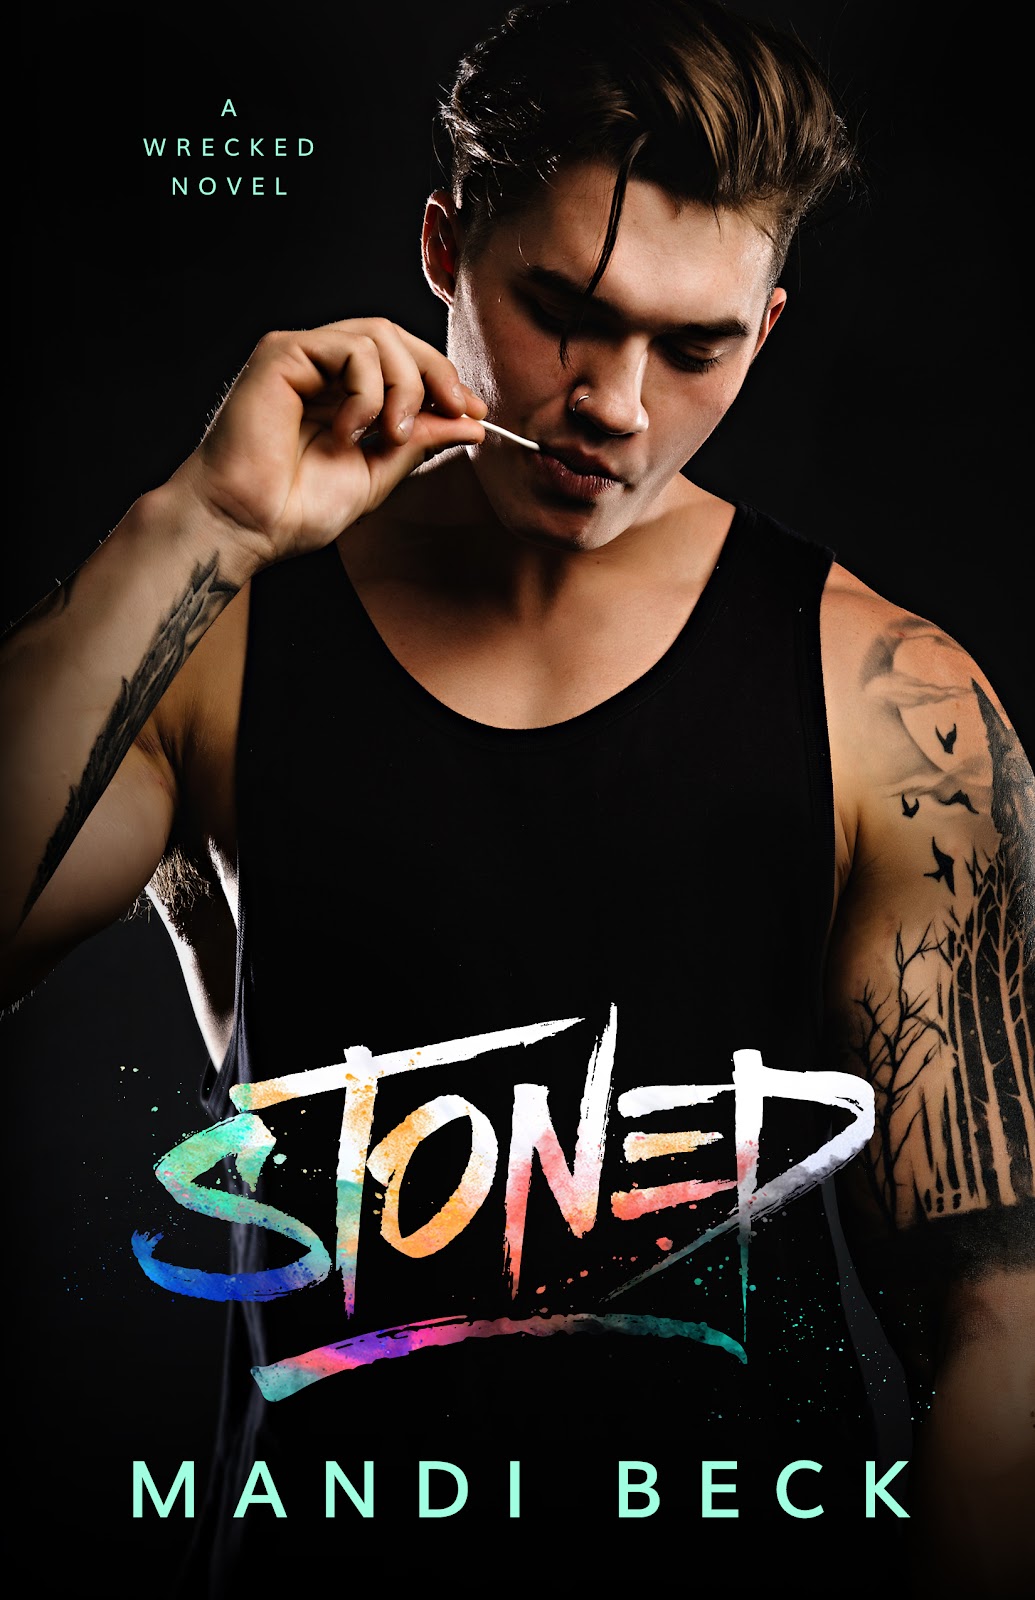 Stoned_FrontCover.jpg